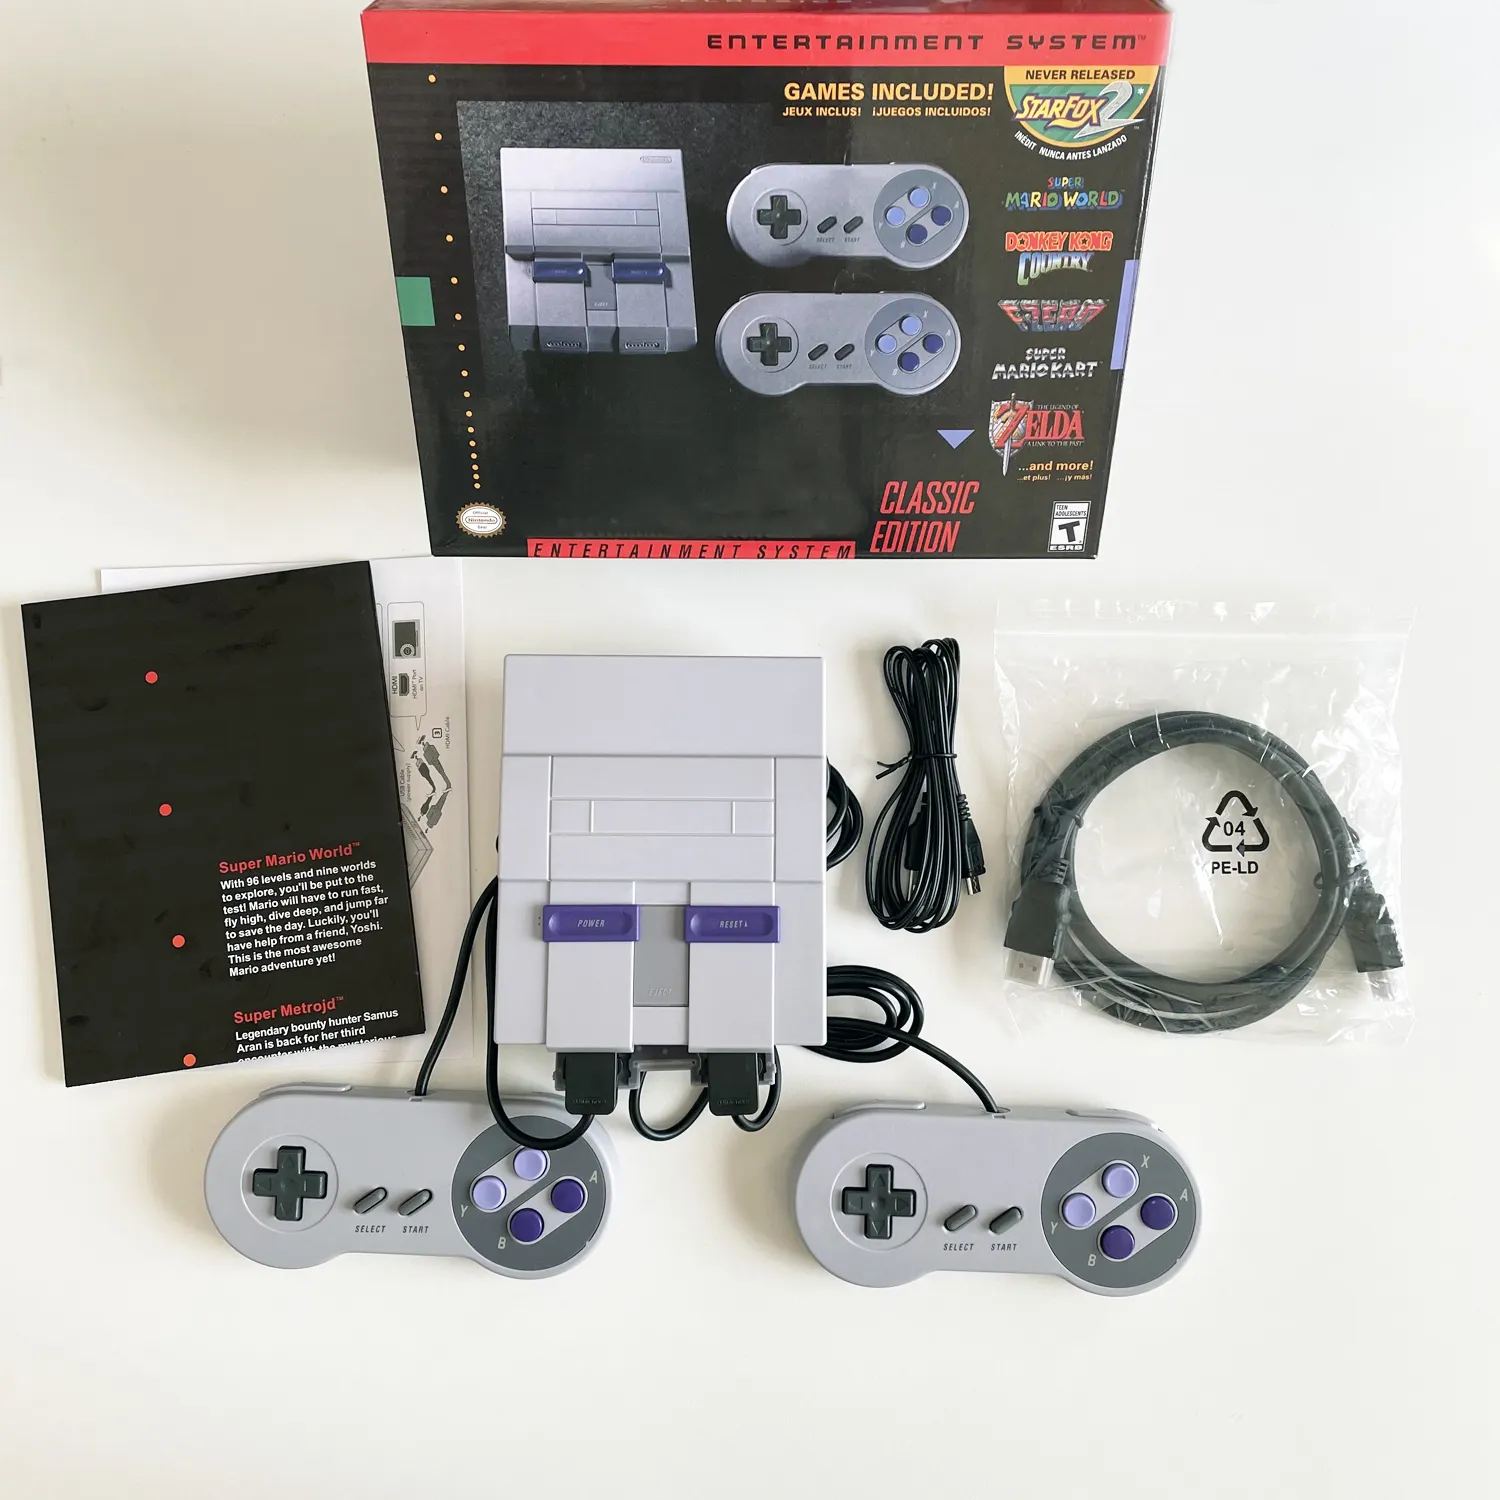 16 Bit Super Classic Mini Entertainment System DIY 5000 Games In One For Super Nintendo Classic Edition Game Console